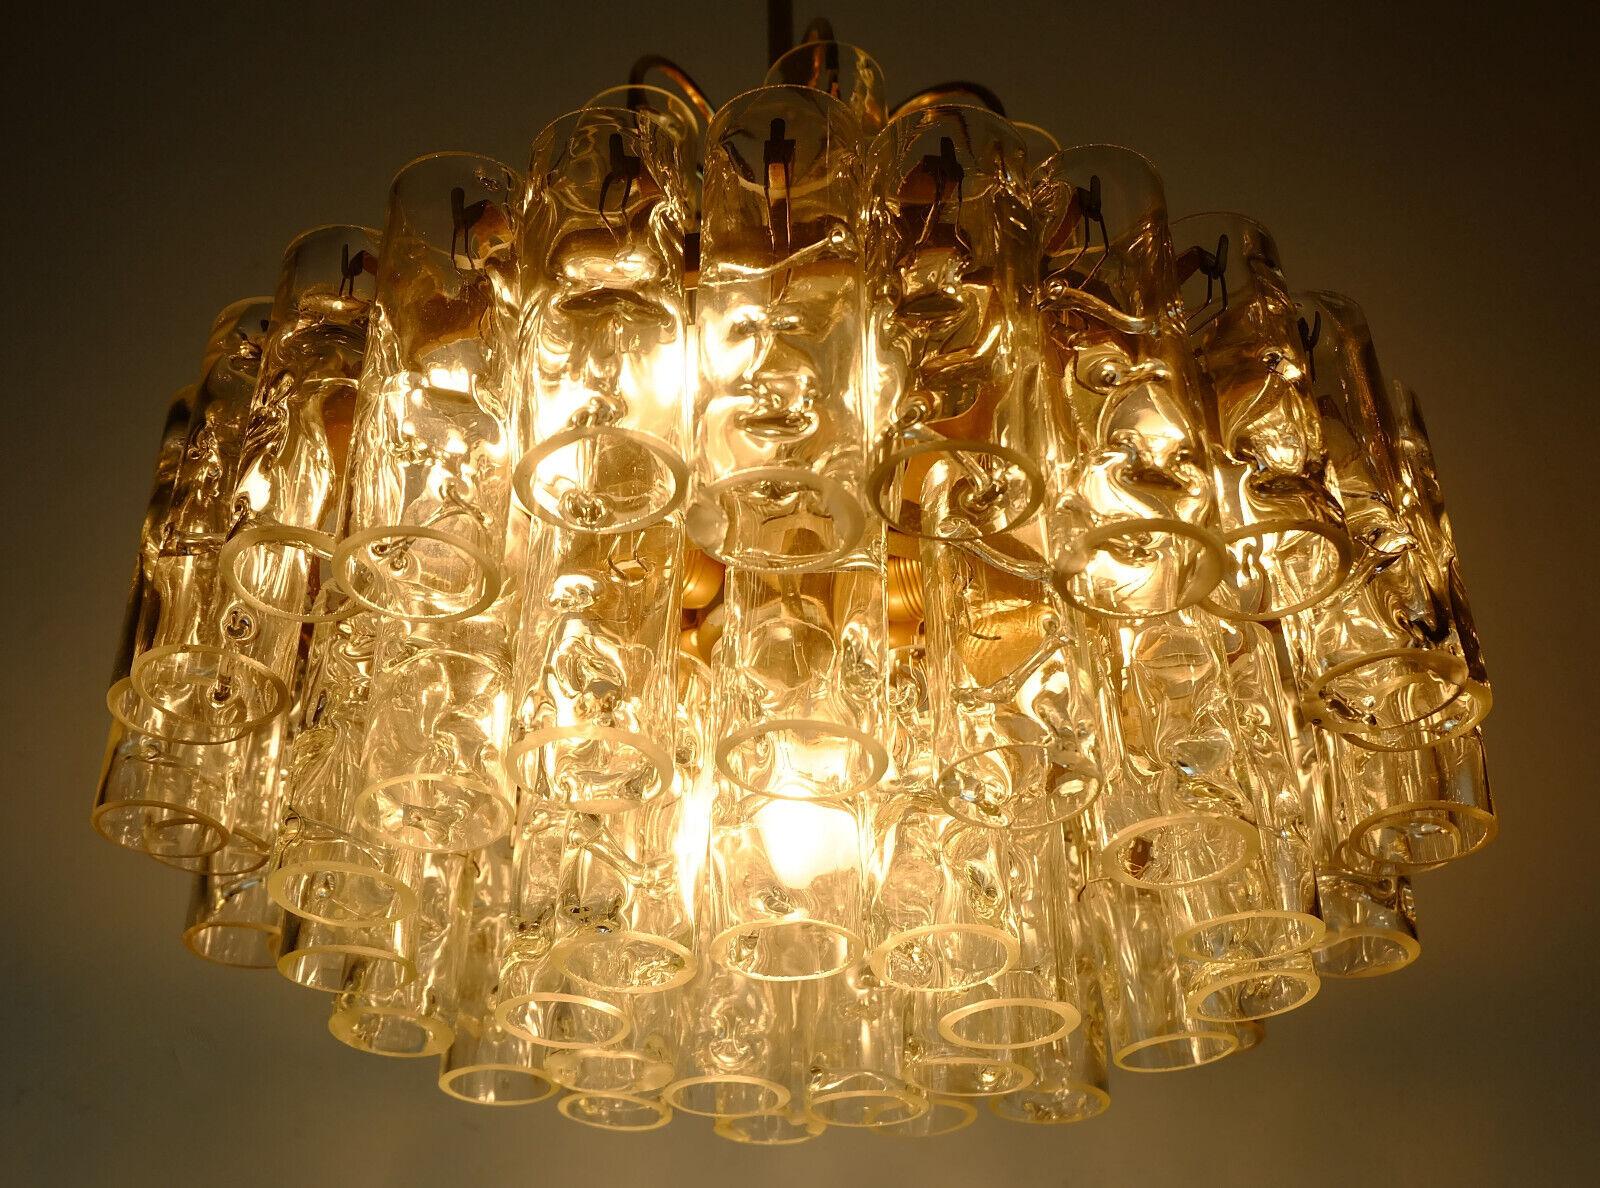 4-Tier Doria Chandelier with 62 Glass Tubes Ice Glass Structured Glass, 1960s For Sale 3